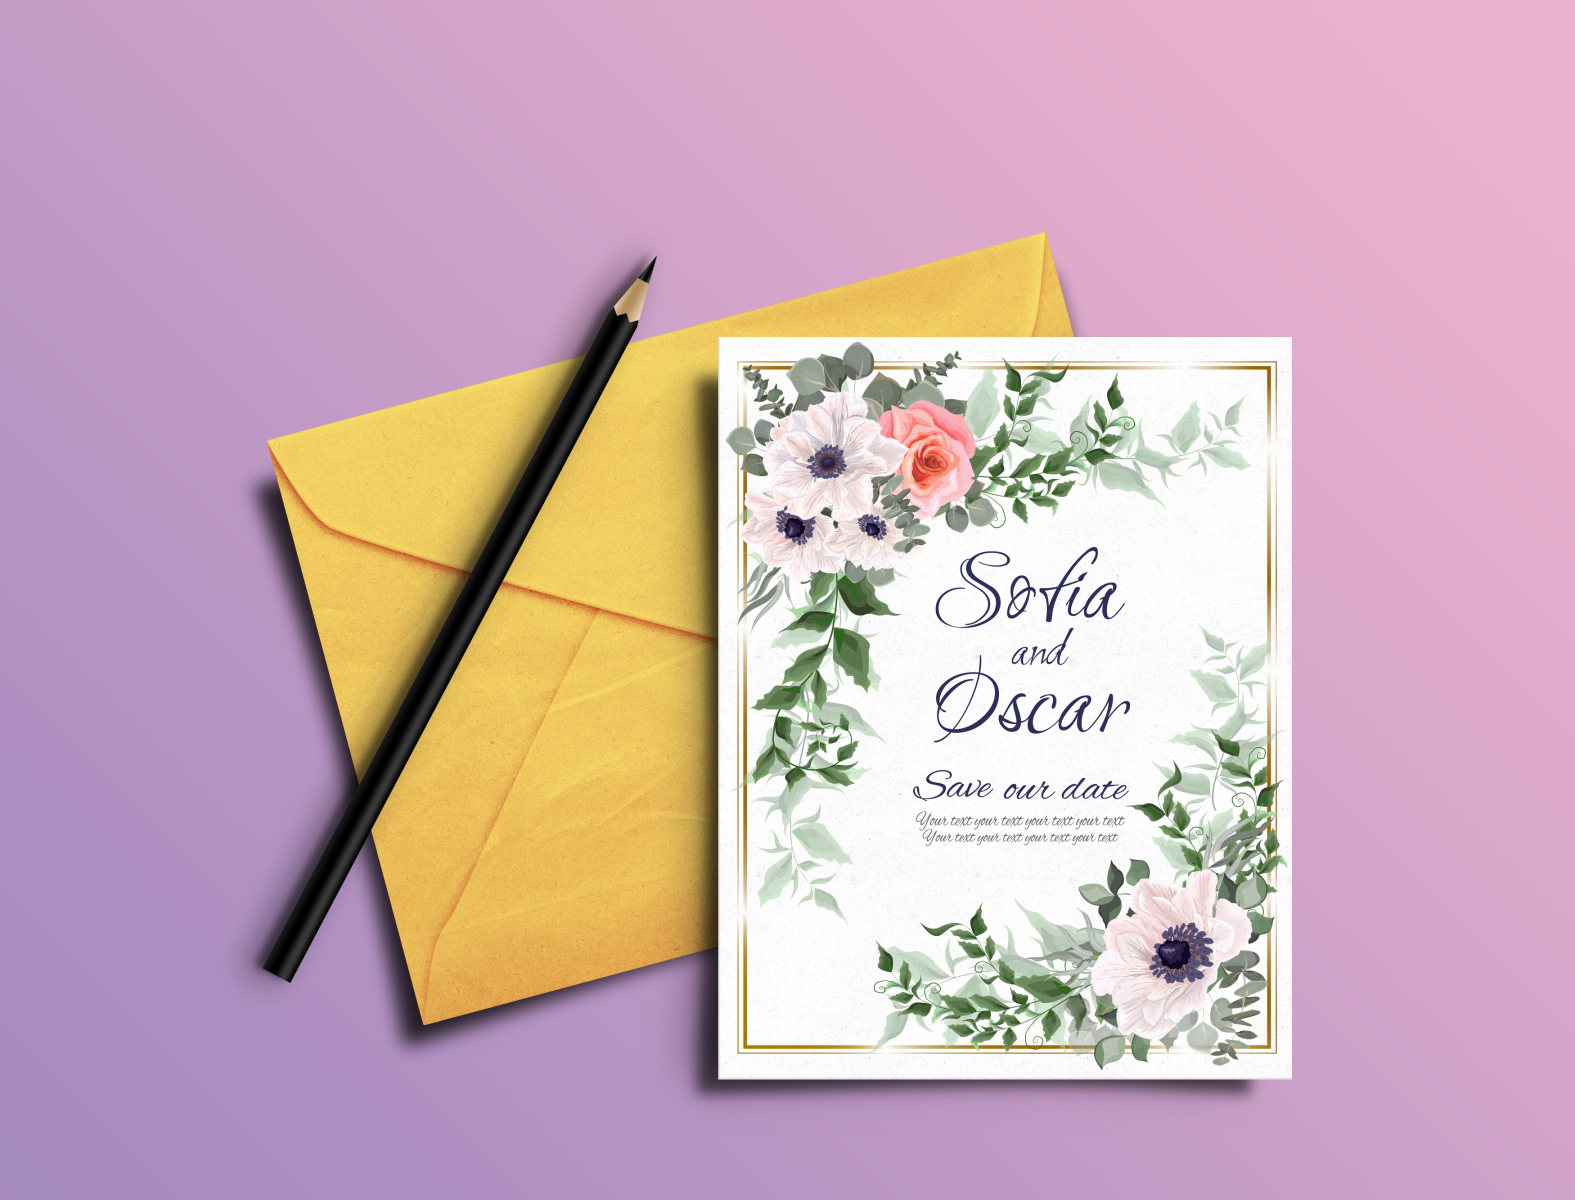 floral-template-for-a-wedding-invitation-by-alenini-on-dribbble